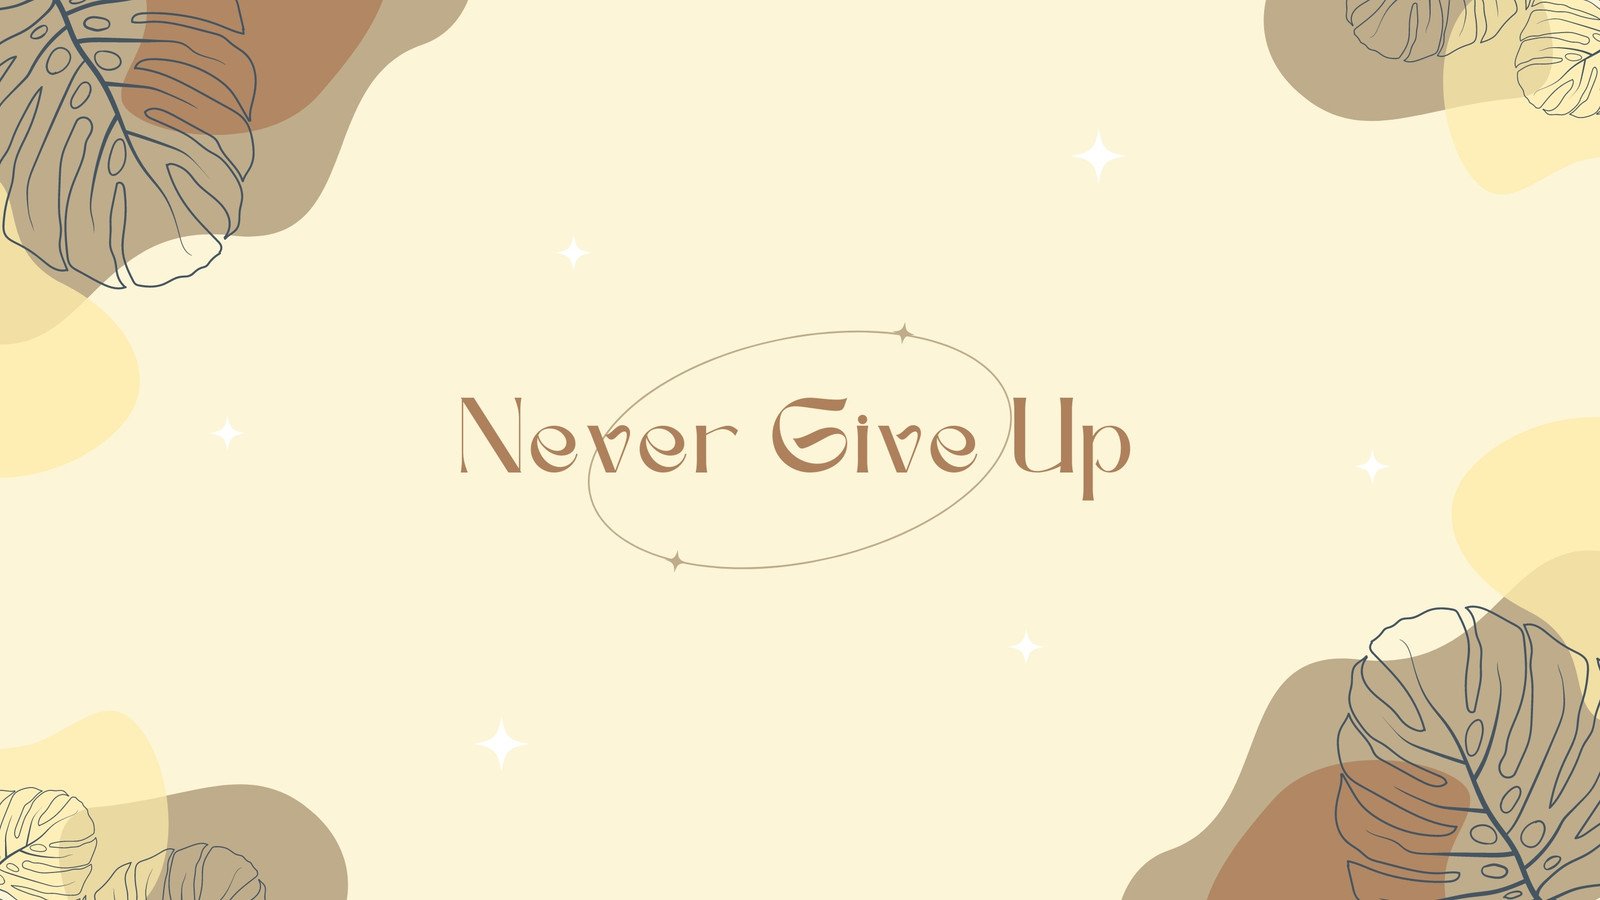 A poster that says never give up - Brown